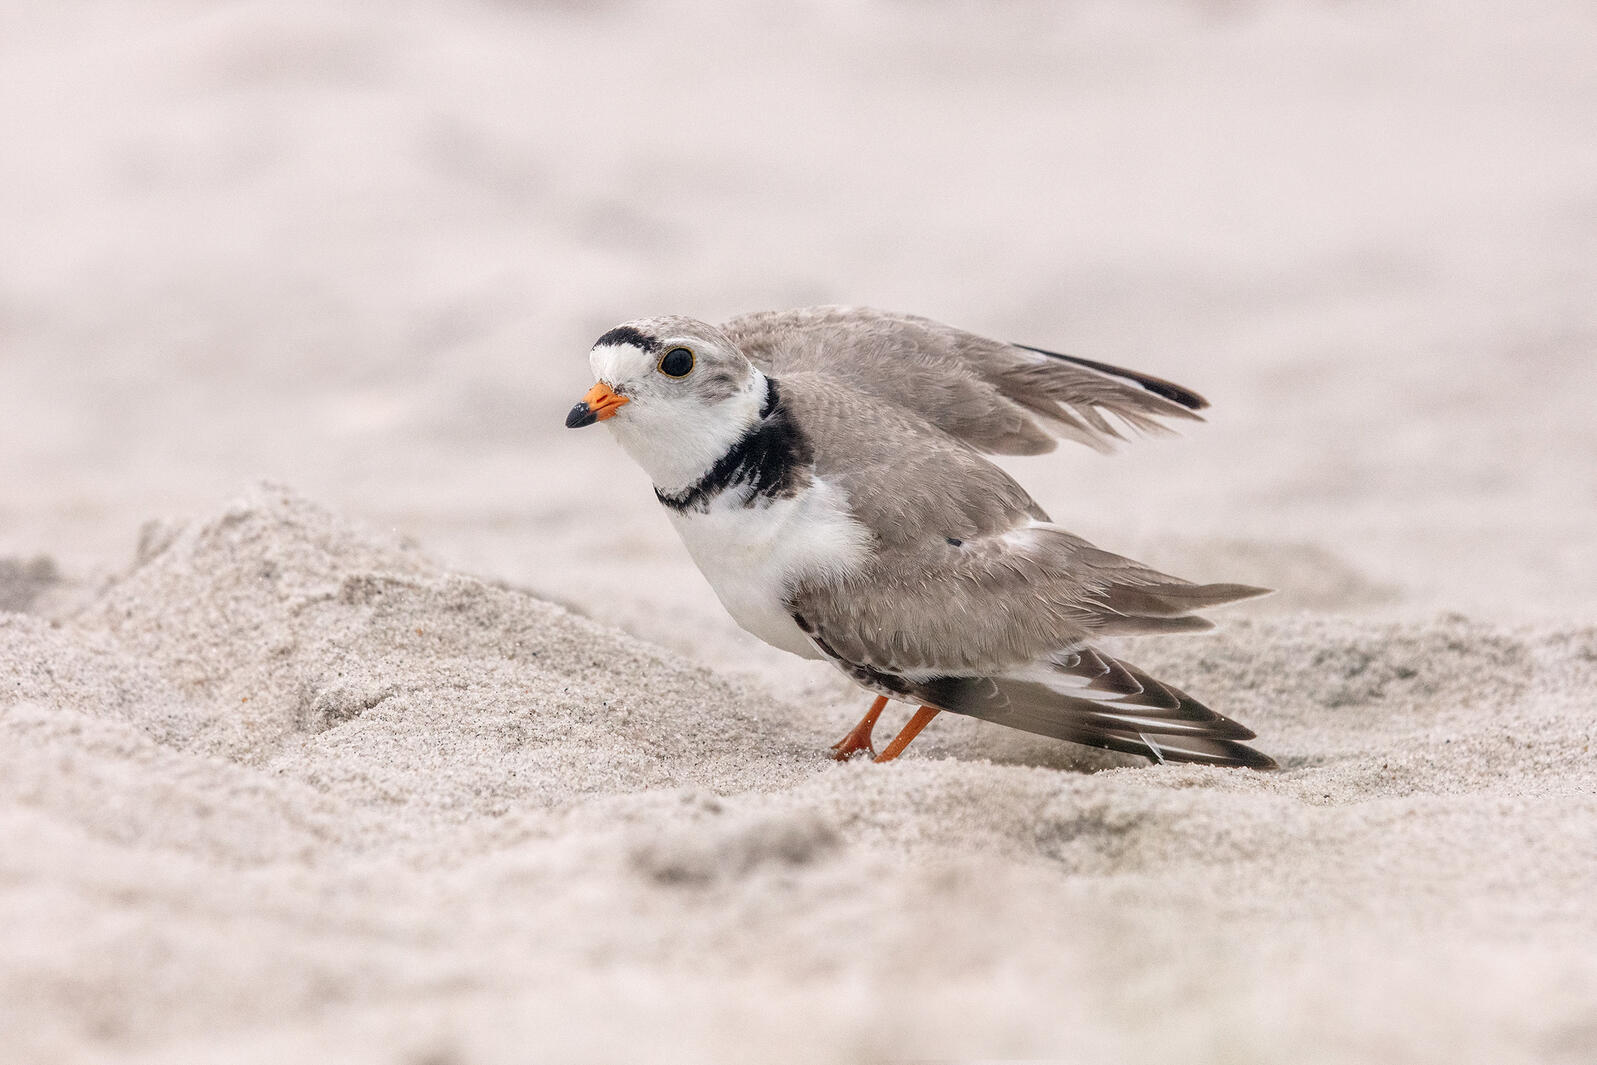 Broken-wing display by a Piping Plover.